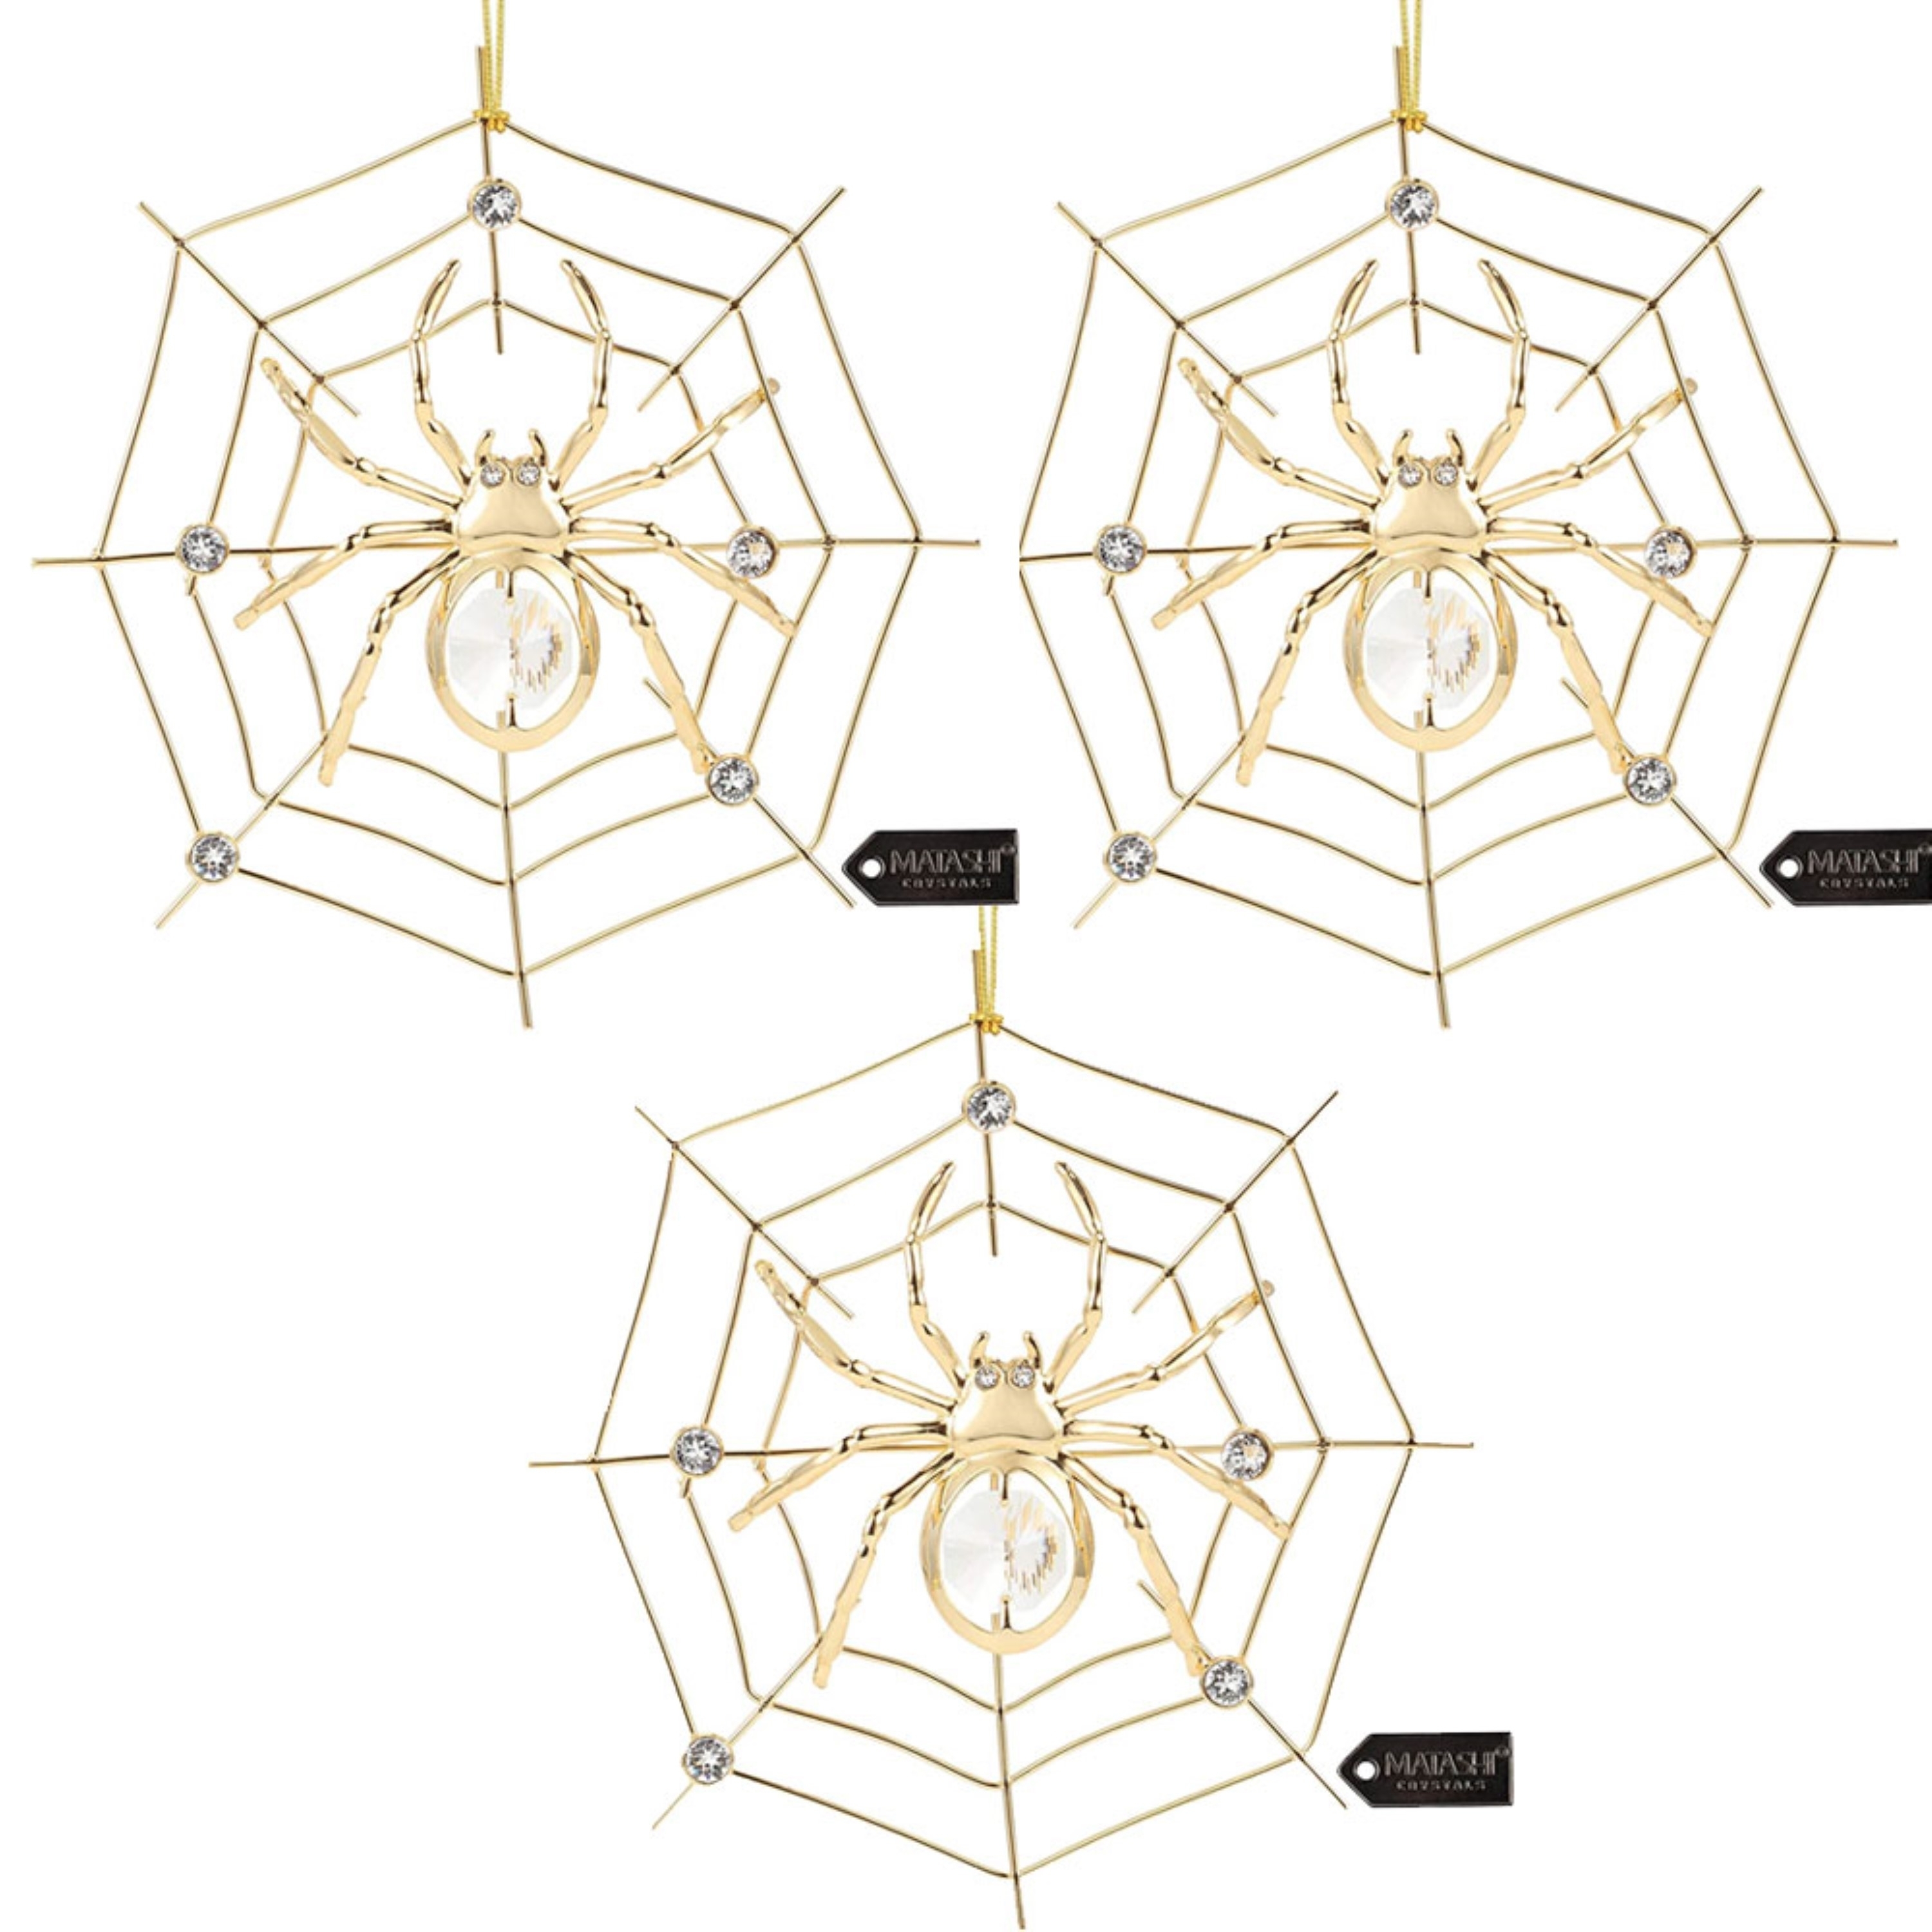 (3 Set) Matashi 24K Gold Plated Crystal Studded Lucky Spider Hanging Ornaments For Christmas Tree Spider Gift For Christams Holiday Decor